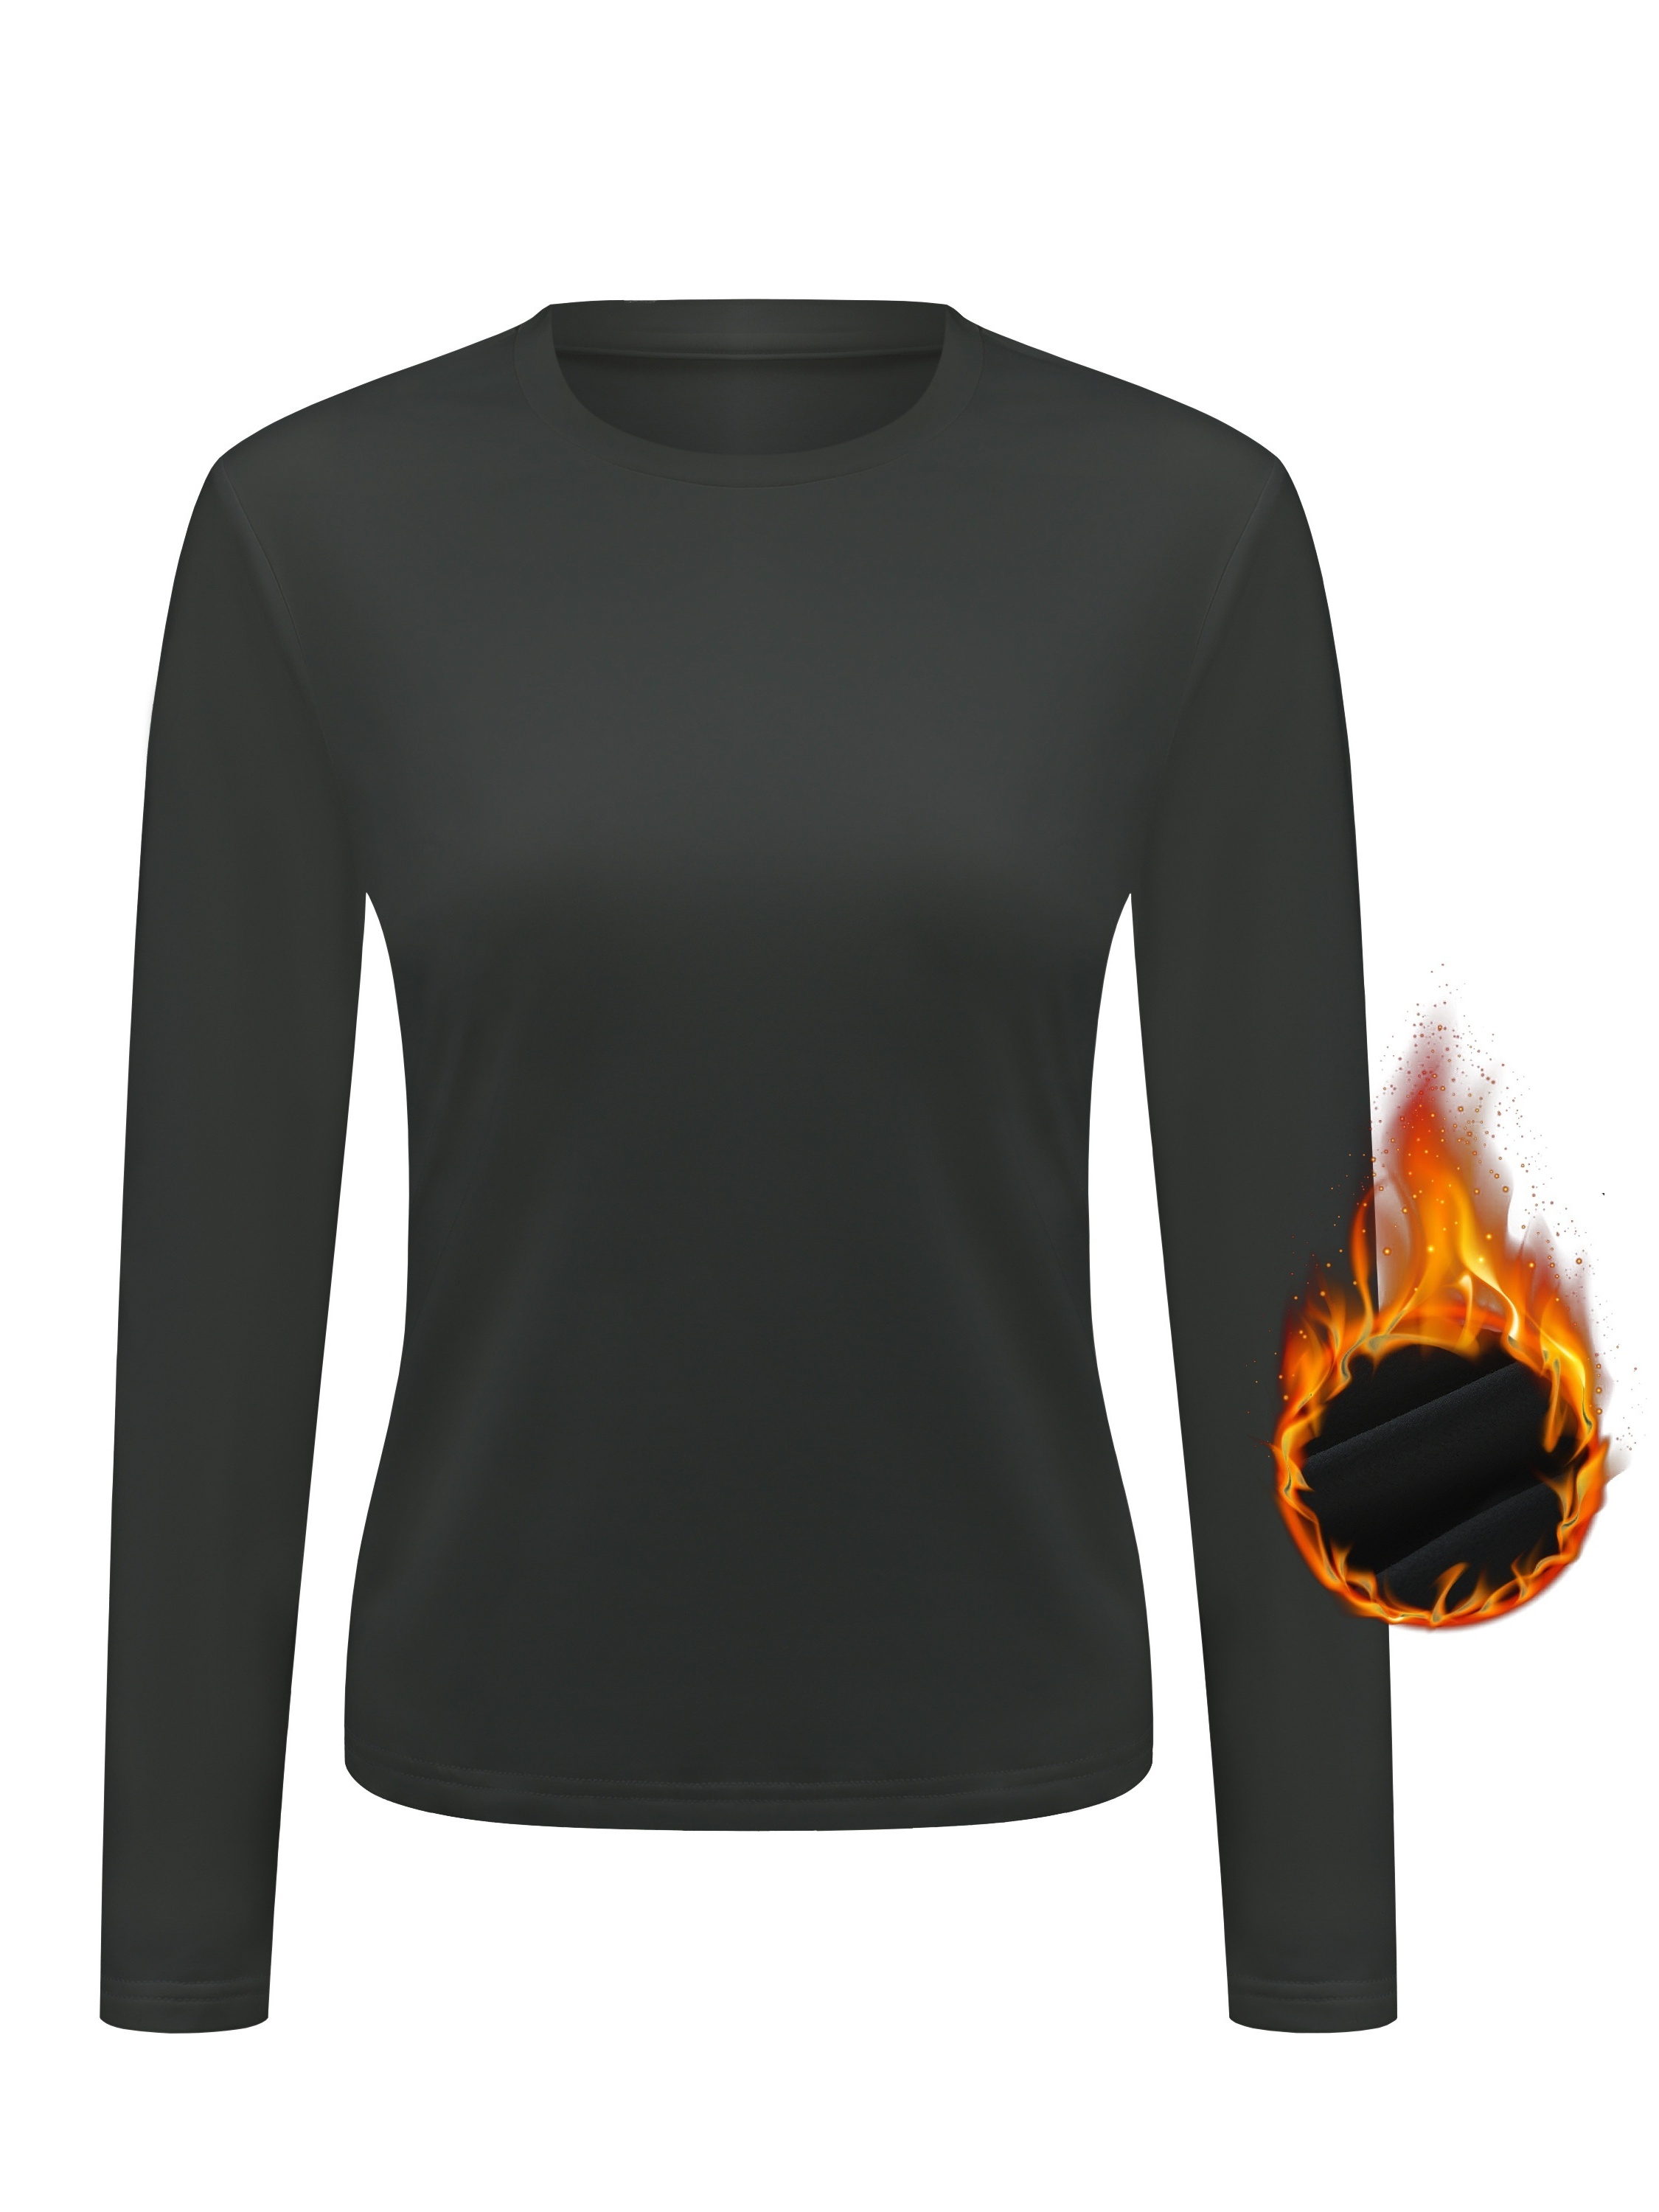 Female Thermal Top T-Shirt Winter Tops For Women Crew Neck Lined Thermal  Thermal Underwear Slim Tops Long Sleeve Thermal Shirts